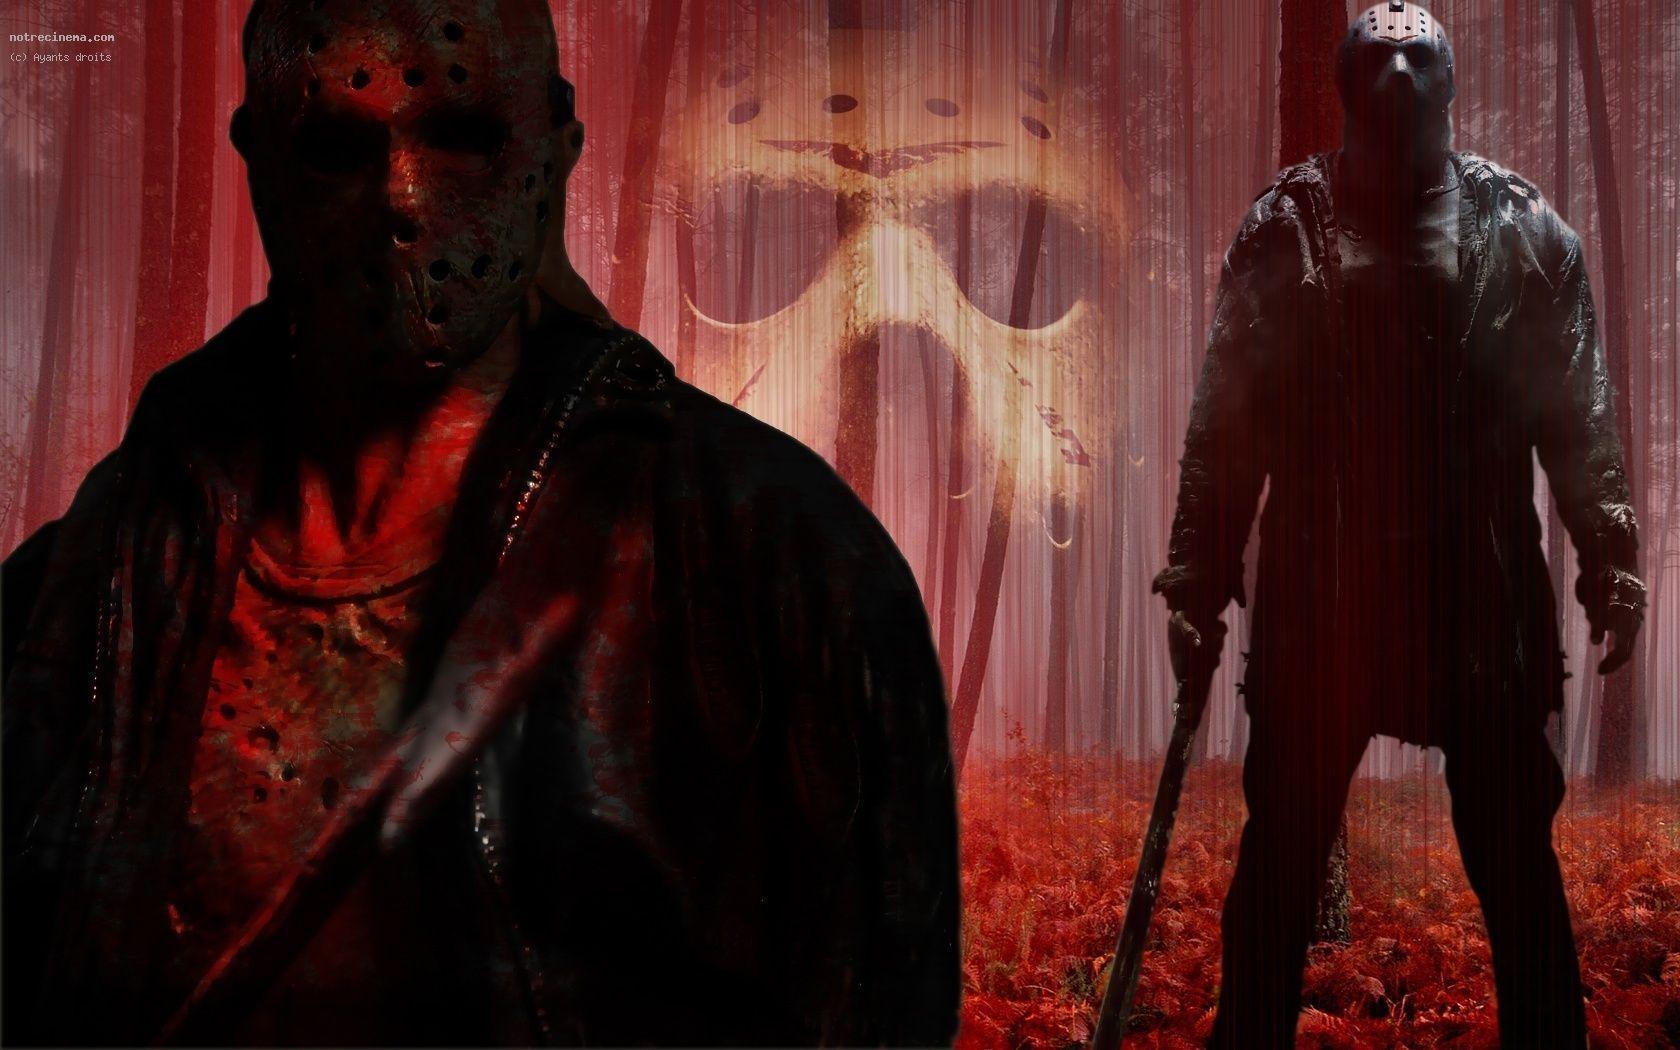 Free Download New Friday The 13th 2009 Image